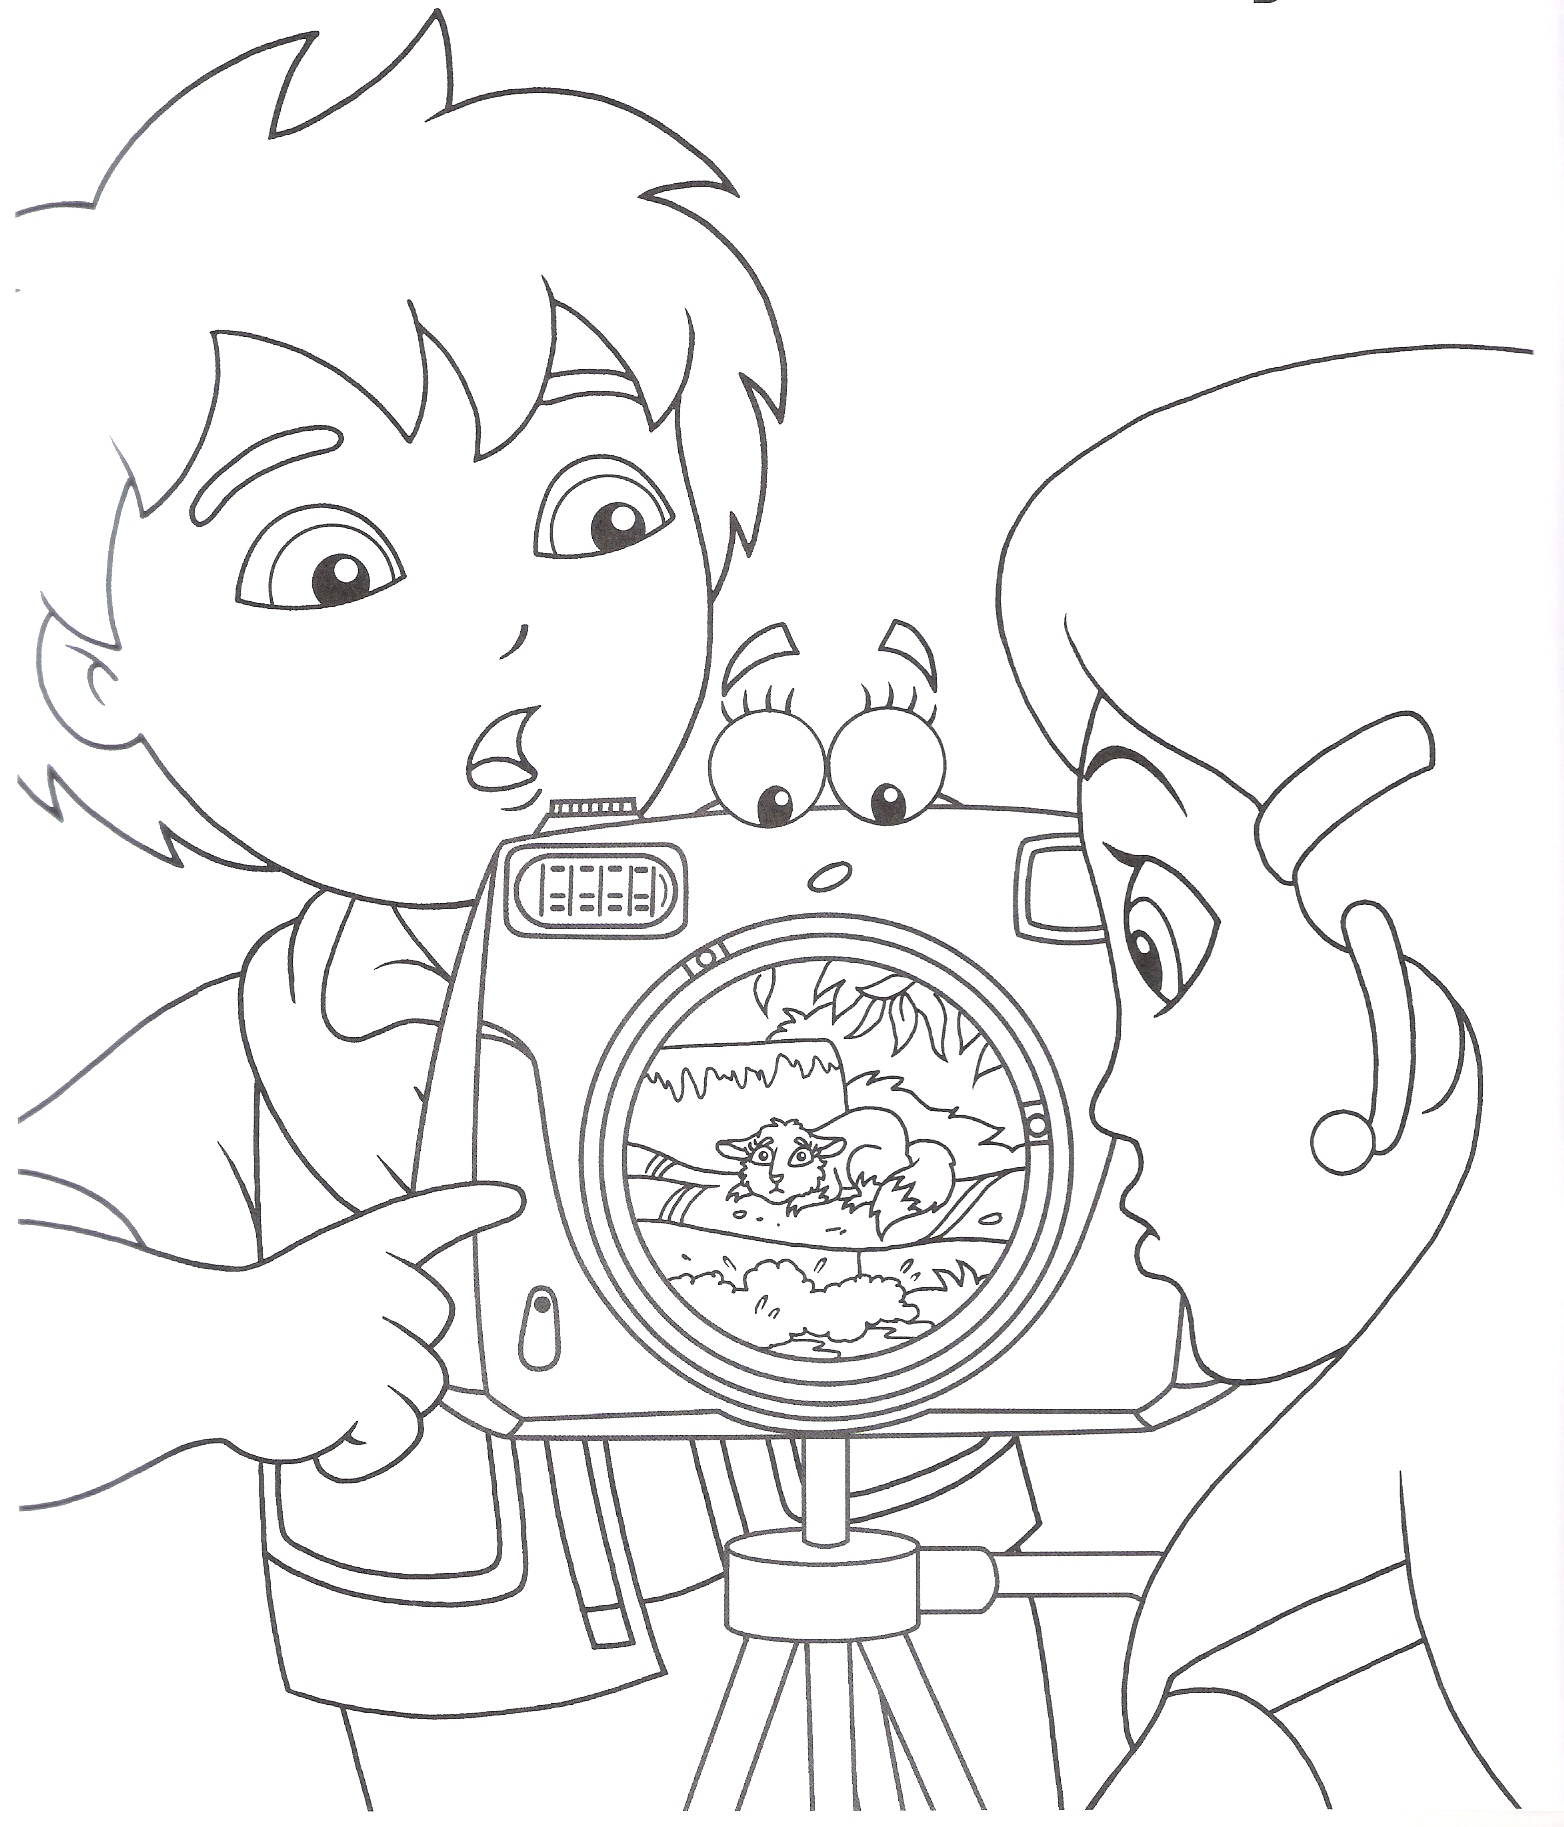 Diego Coloring Pages Top 10 Free Printable Diego Coloring Pages ...